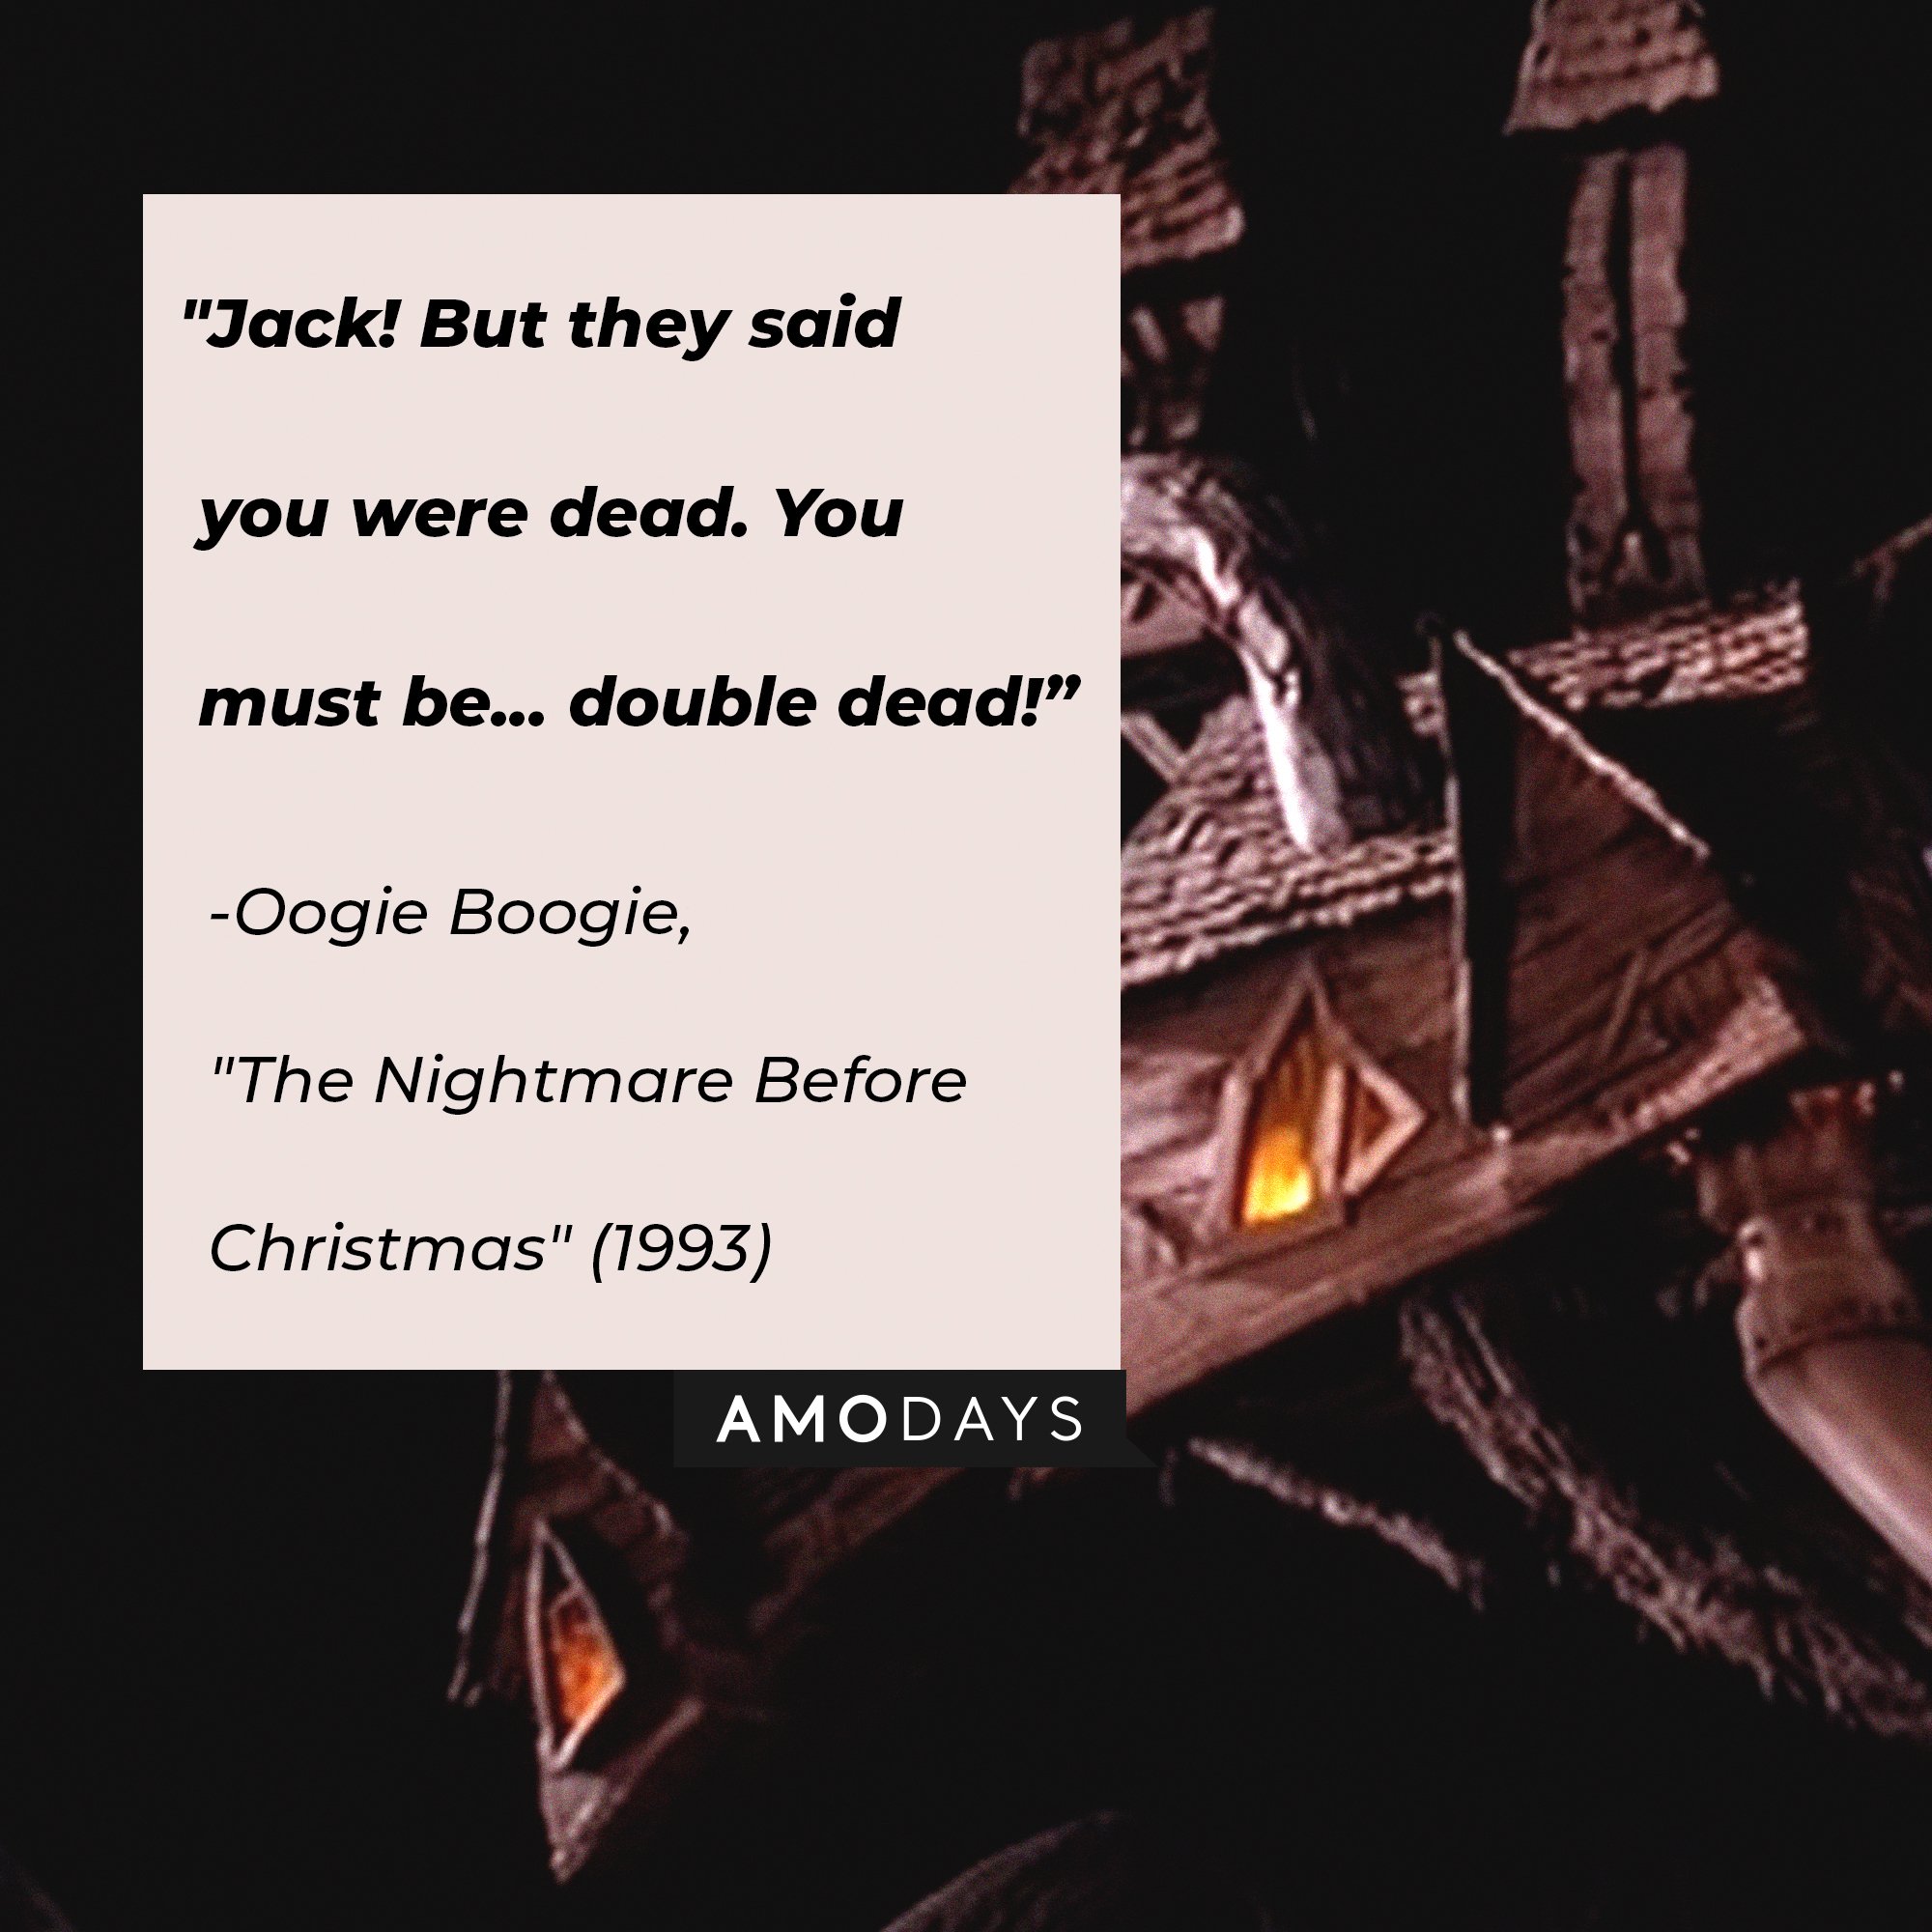   Oogie Boogie’s quote from "The Nightmare Before Christmas": "Jack! But they said you were dead. You must be... double dead!" | Image: AmoDays